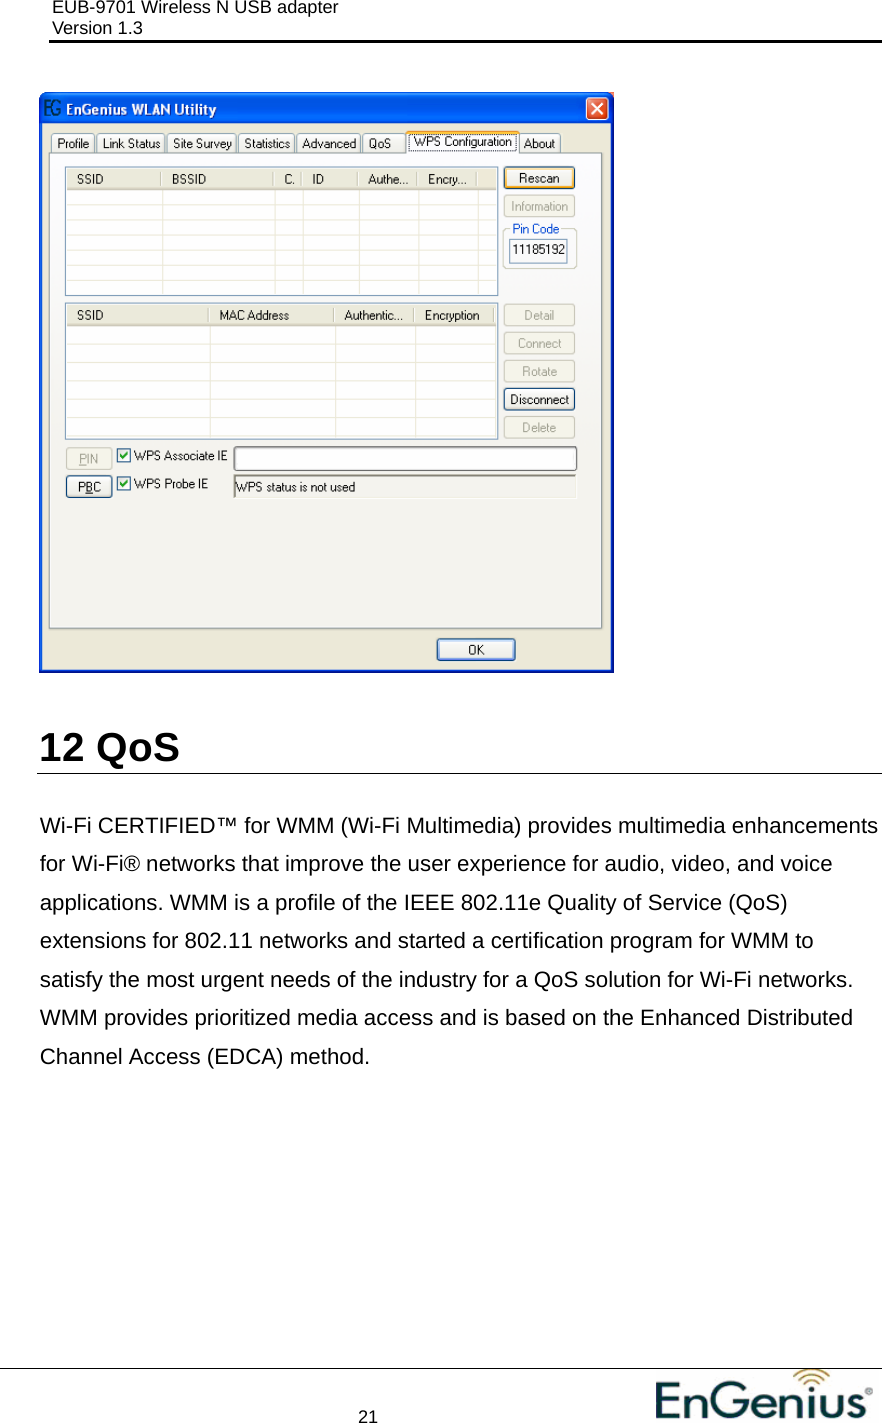 EUB-9701 Wireless N USB adapter                                     Version 1.3    21                                                            12  QoS  Wi-Fi CERTIFIED™ for WMM (Wi-Fi Multimedia) provides multimedia enhancements for Wi-Fi® networks that improve the user experience for audio, video, and voice applications. WMM is a profile of the IEEE 802.11e Quality of Service (QoS) extensions for 802.11 networks and started a certification program for WMM to satisfy the most urgent needs of the industry for a QoS solution for Wi-Fi networks. WMM provides prioritized media access and is based on the Enhanced Distributed Channel Access (EDCA) method. 